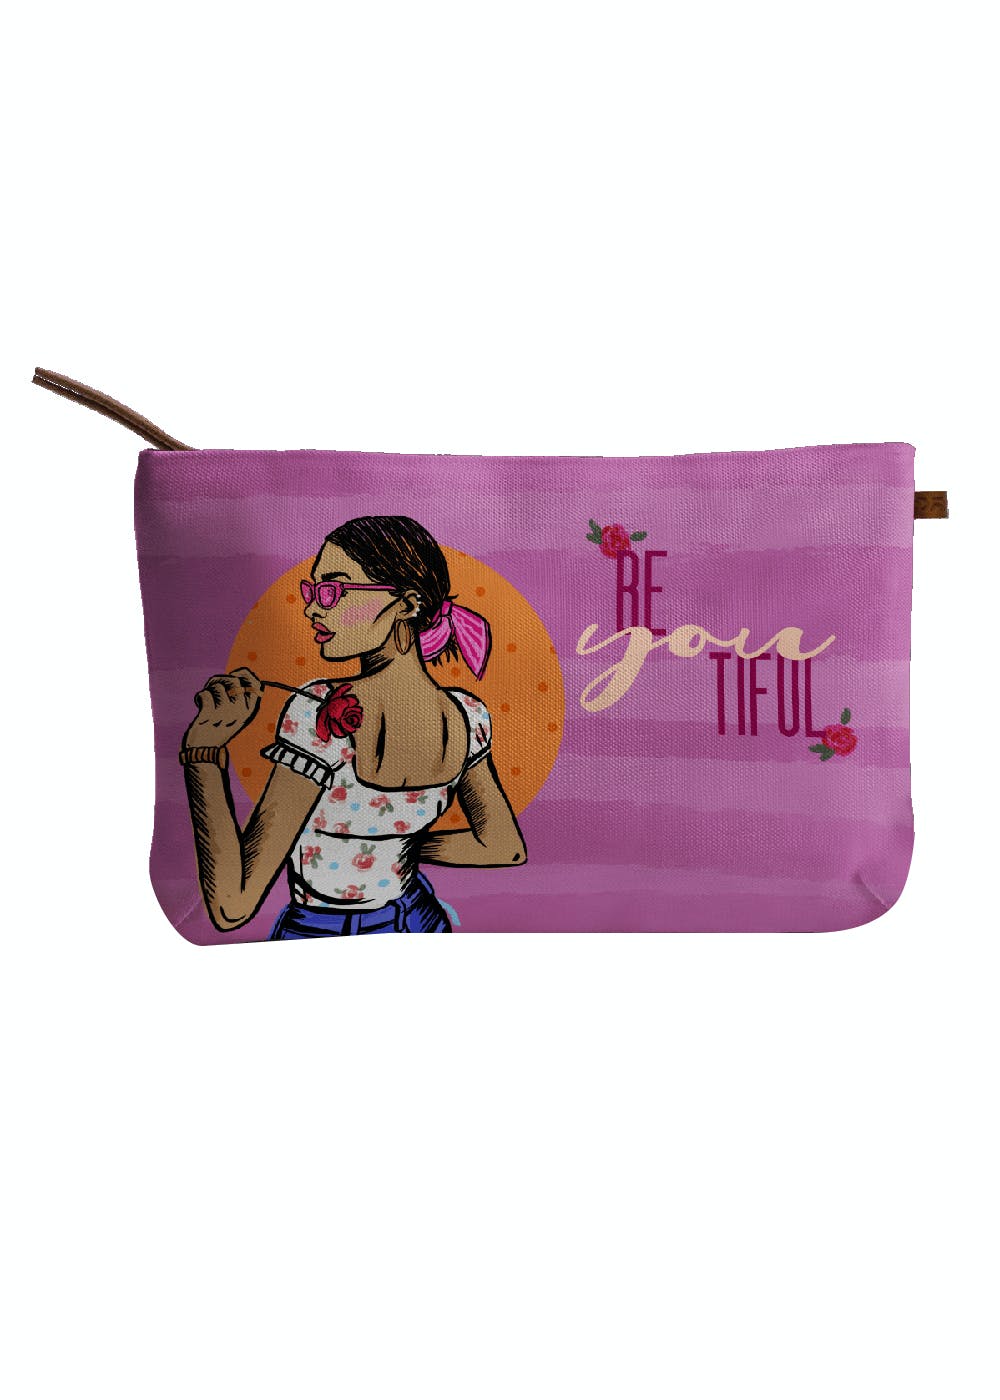 Pouch  Shop Latest Pouch for Women  Girls Online in India  Myntra